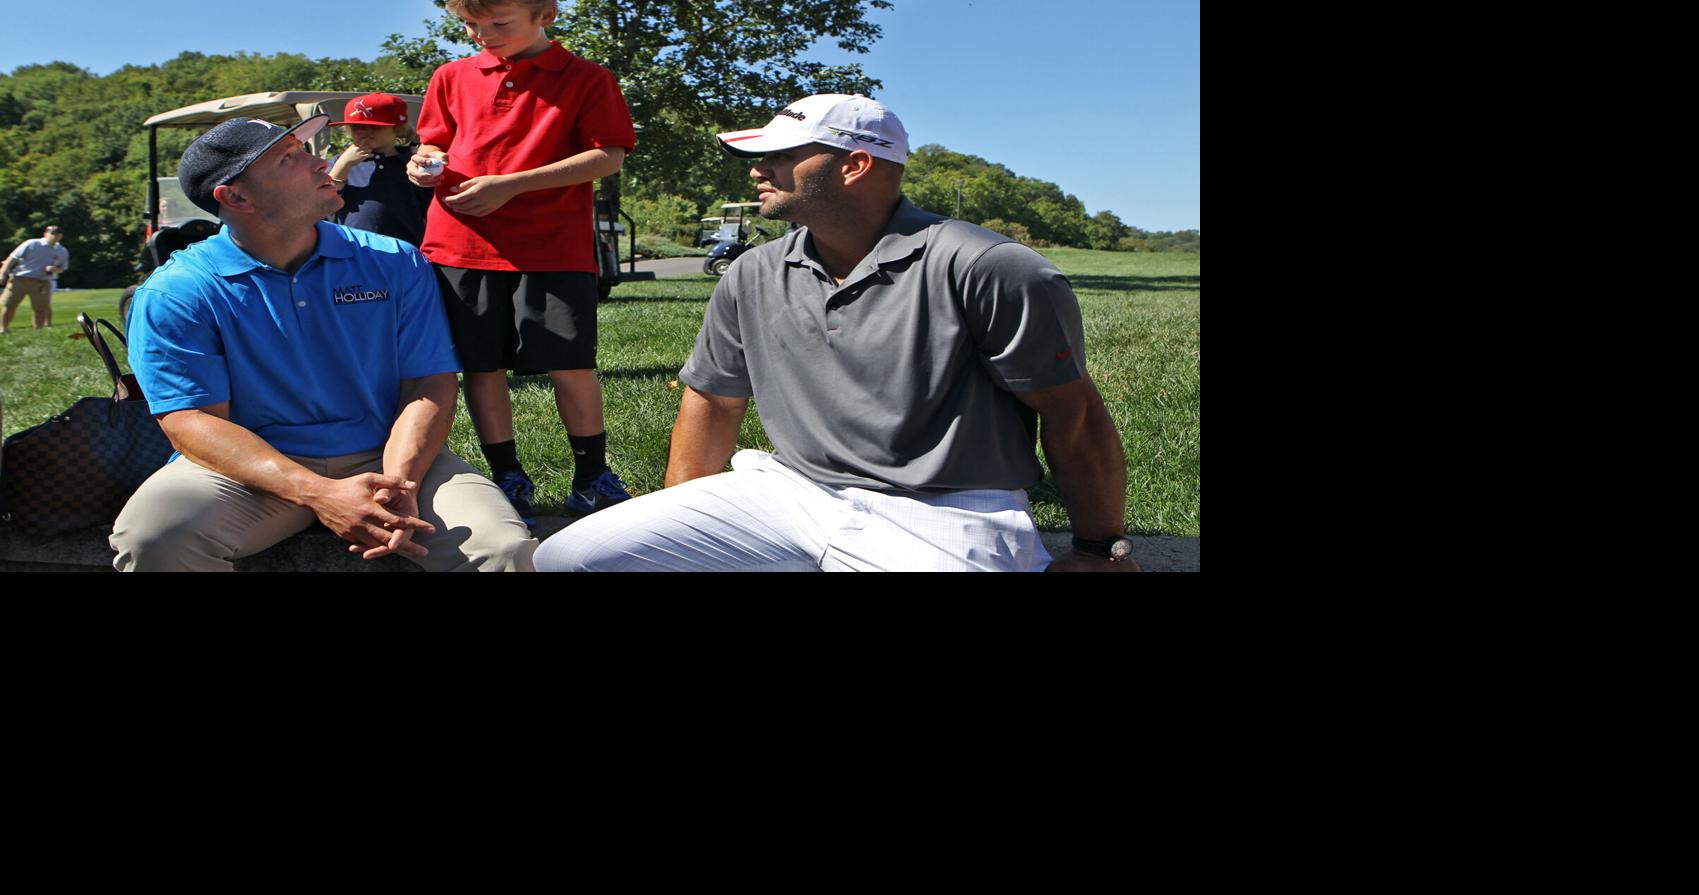 MATT HOLLIDAY HOSTED THE PUJOLS FAMILY FOUNDATION GOLF CLASSIC